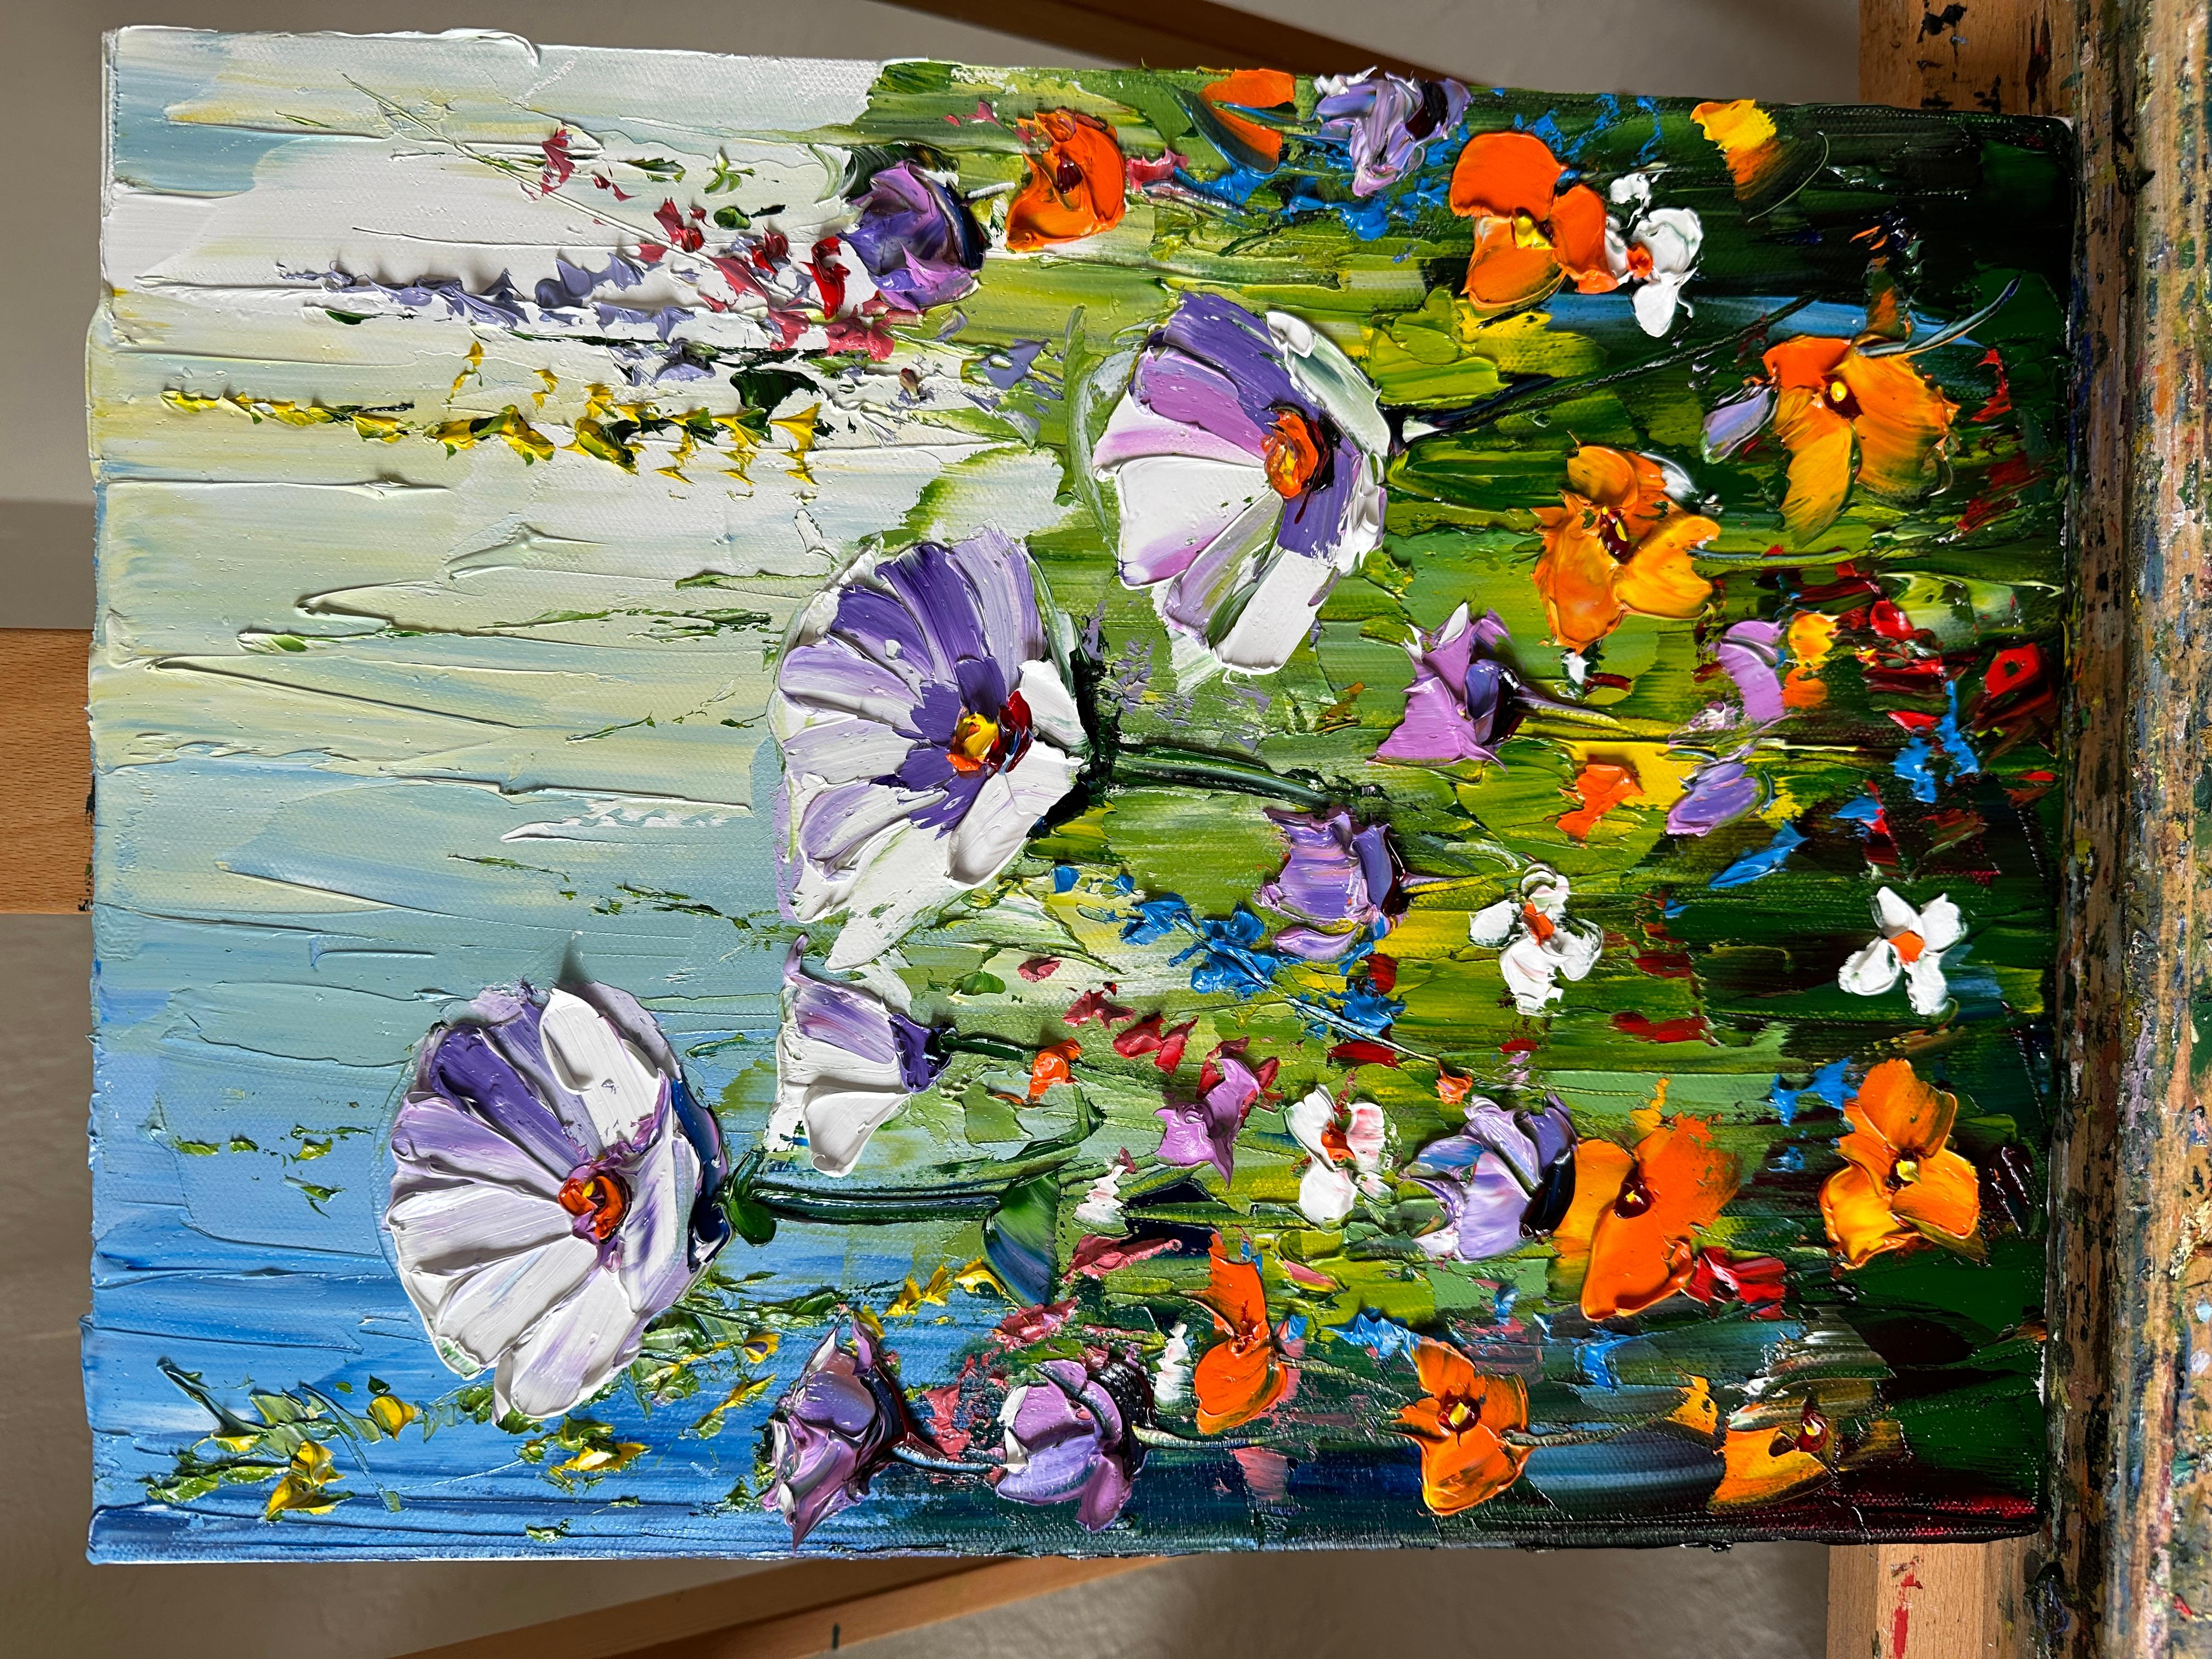 <p>Artist Comments<br>Wildflowers bloom and display their fullest beauty in springtime, with their colorful petals capturing the light. The poppies in the foreground dominate the scene with their charm. Painted entirely with a palette knife, the